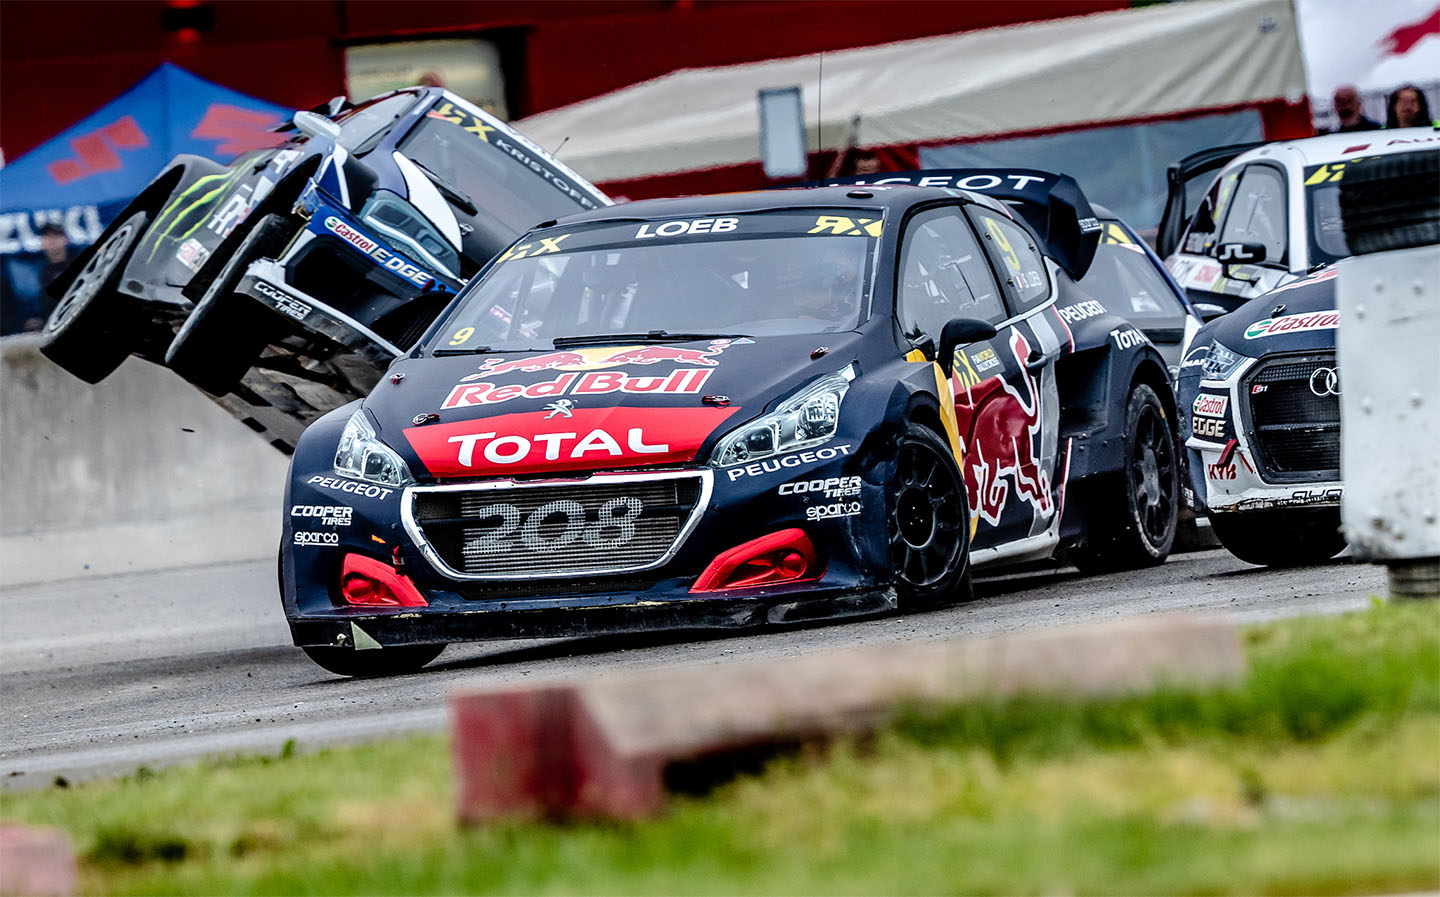 World Rallycross Championship will go all-electric in 2020